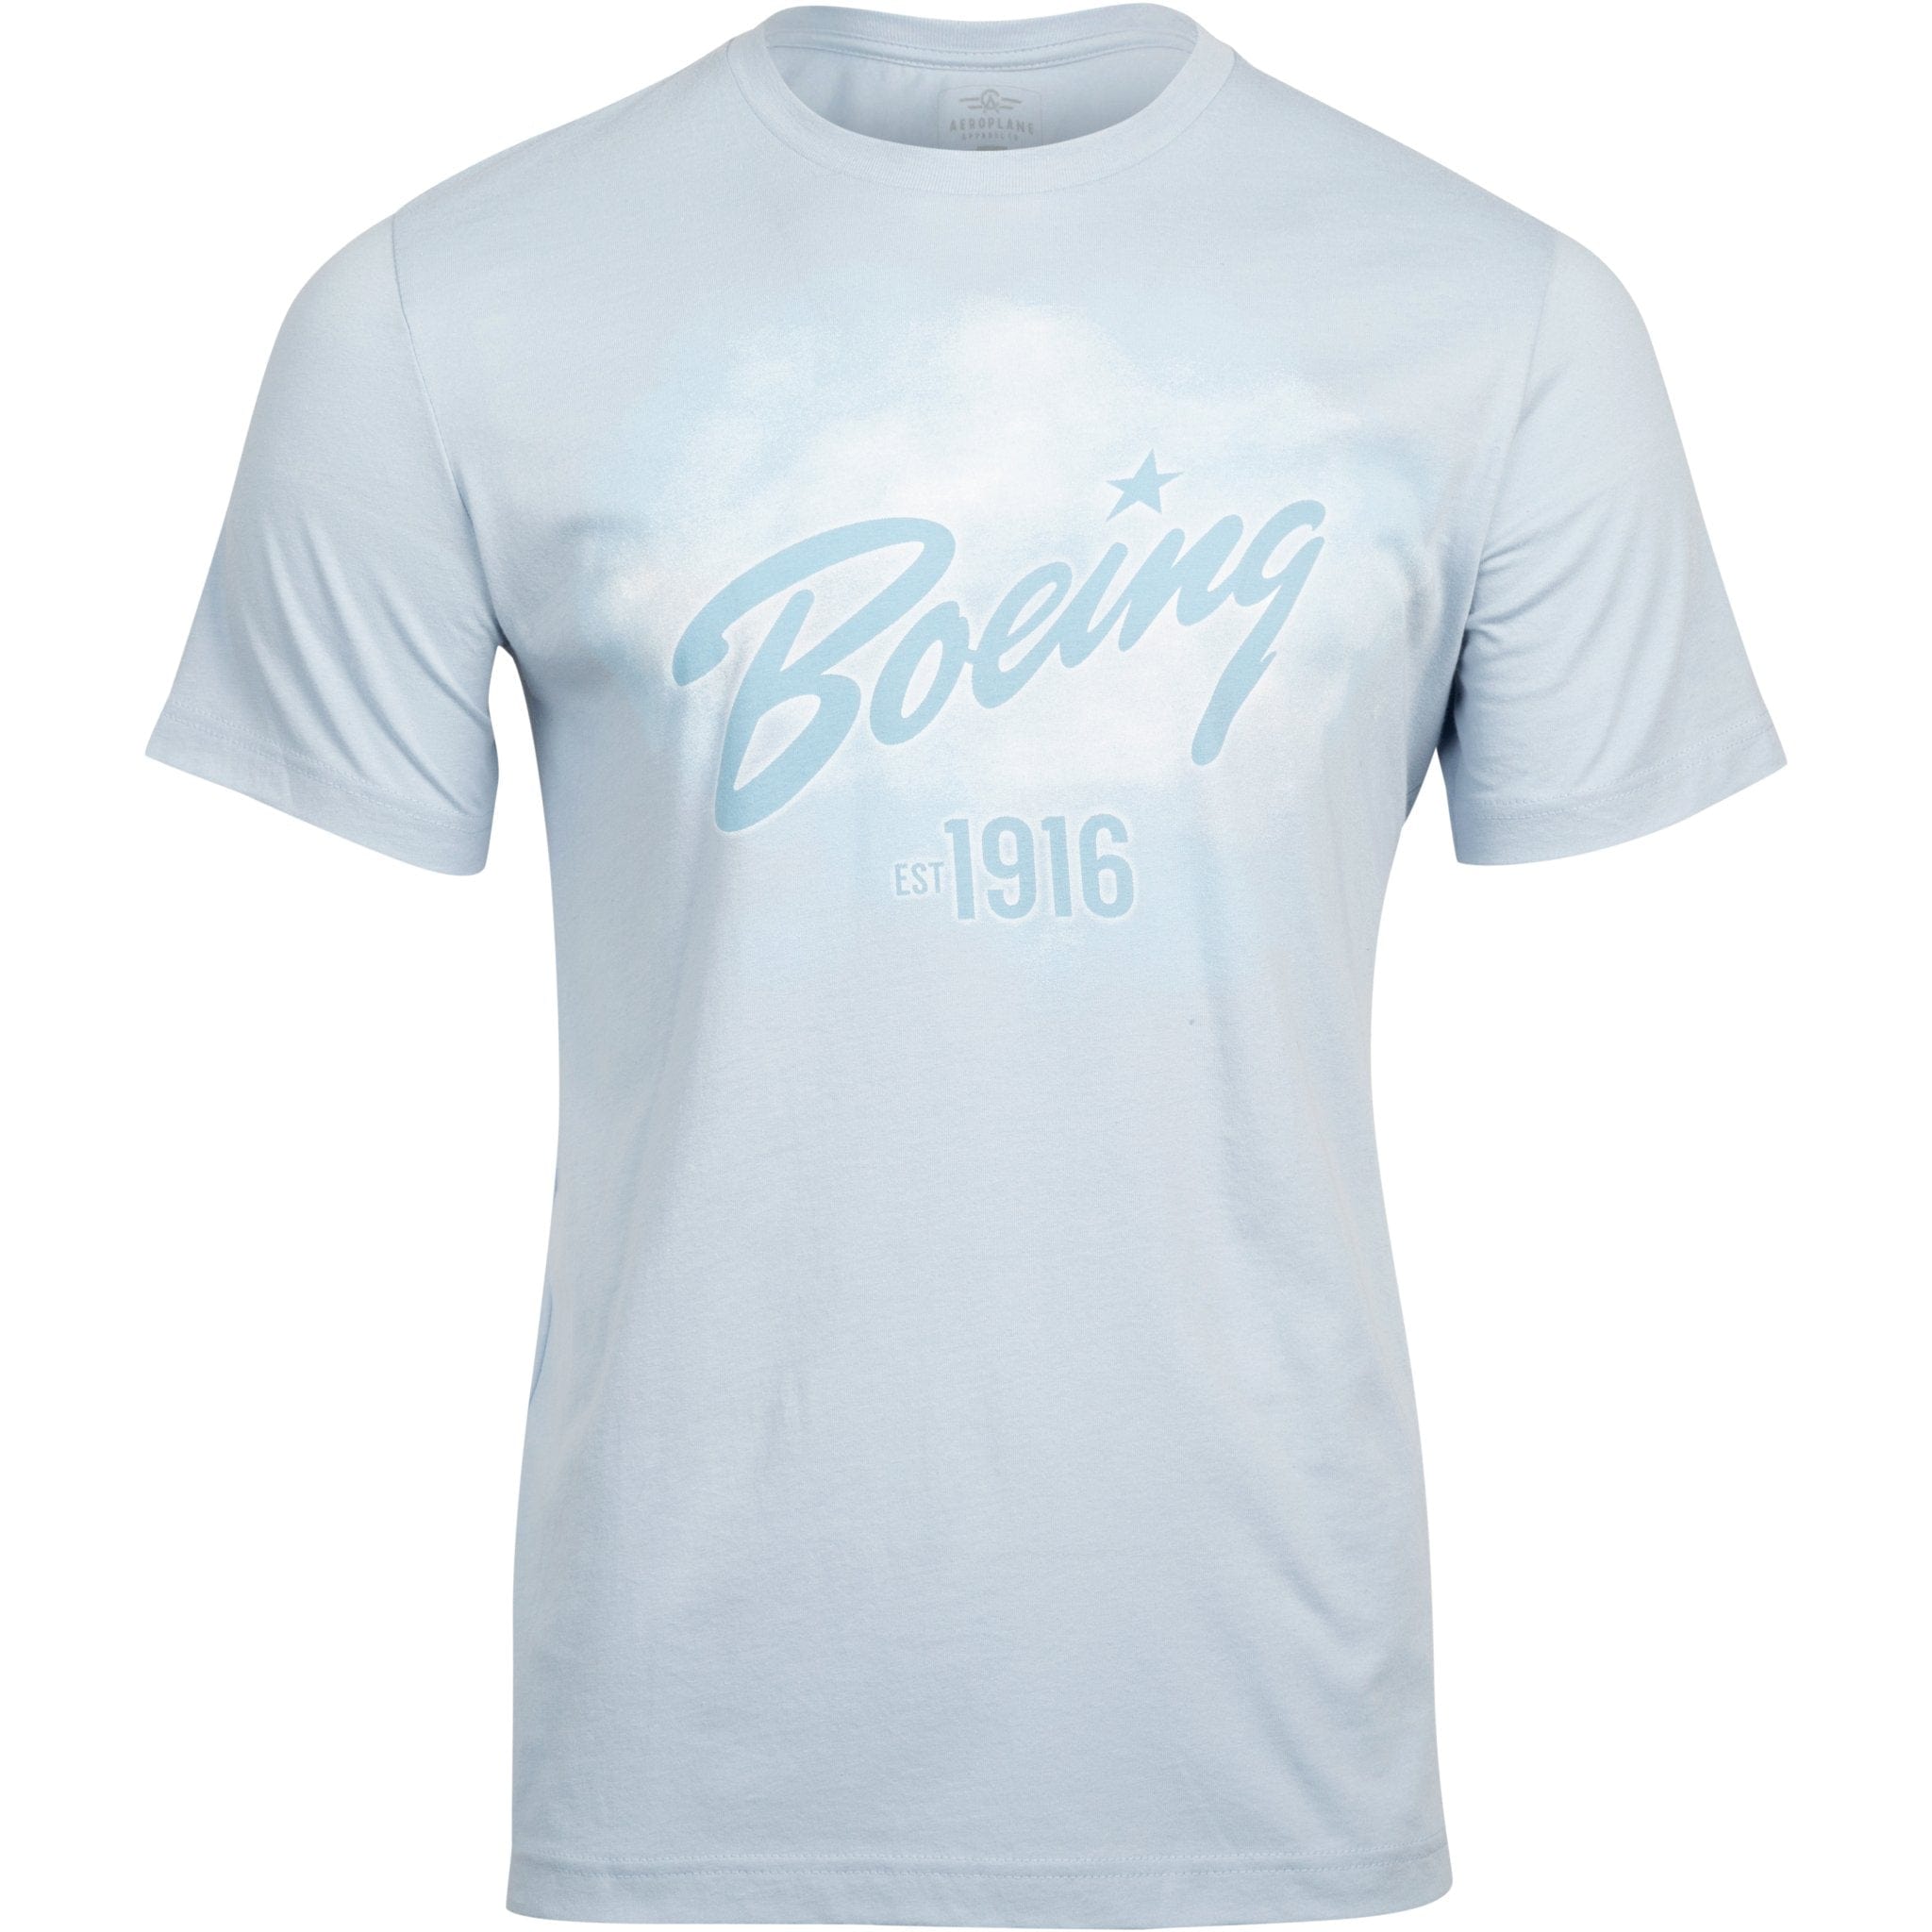 Boeing EST 1916 Officially Licensed Aeroplane Apparel Co. Men's T-Shirt